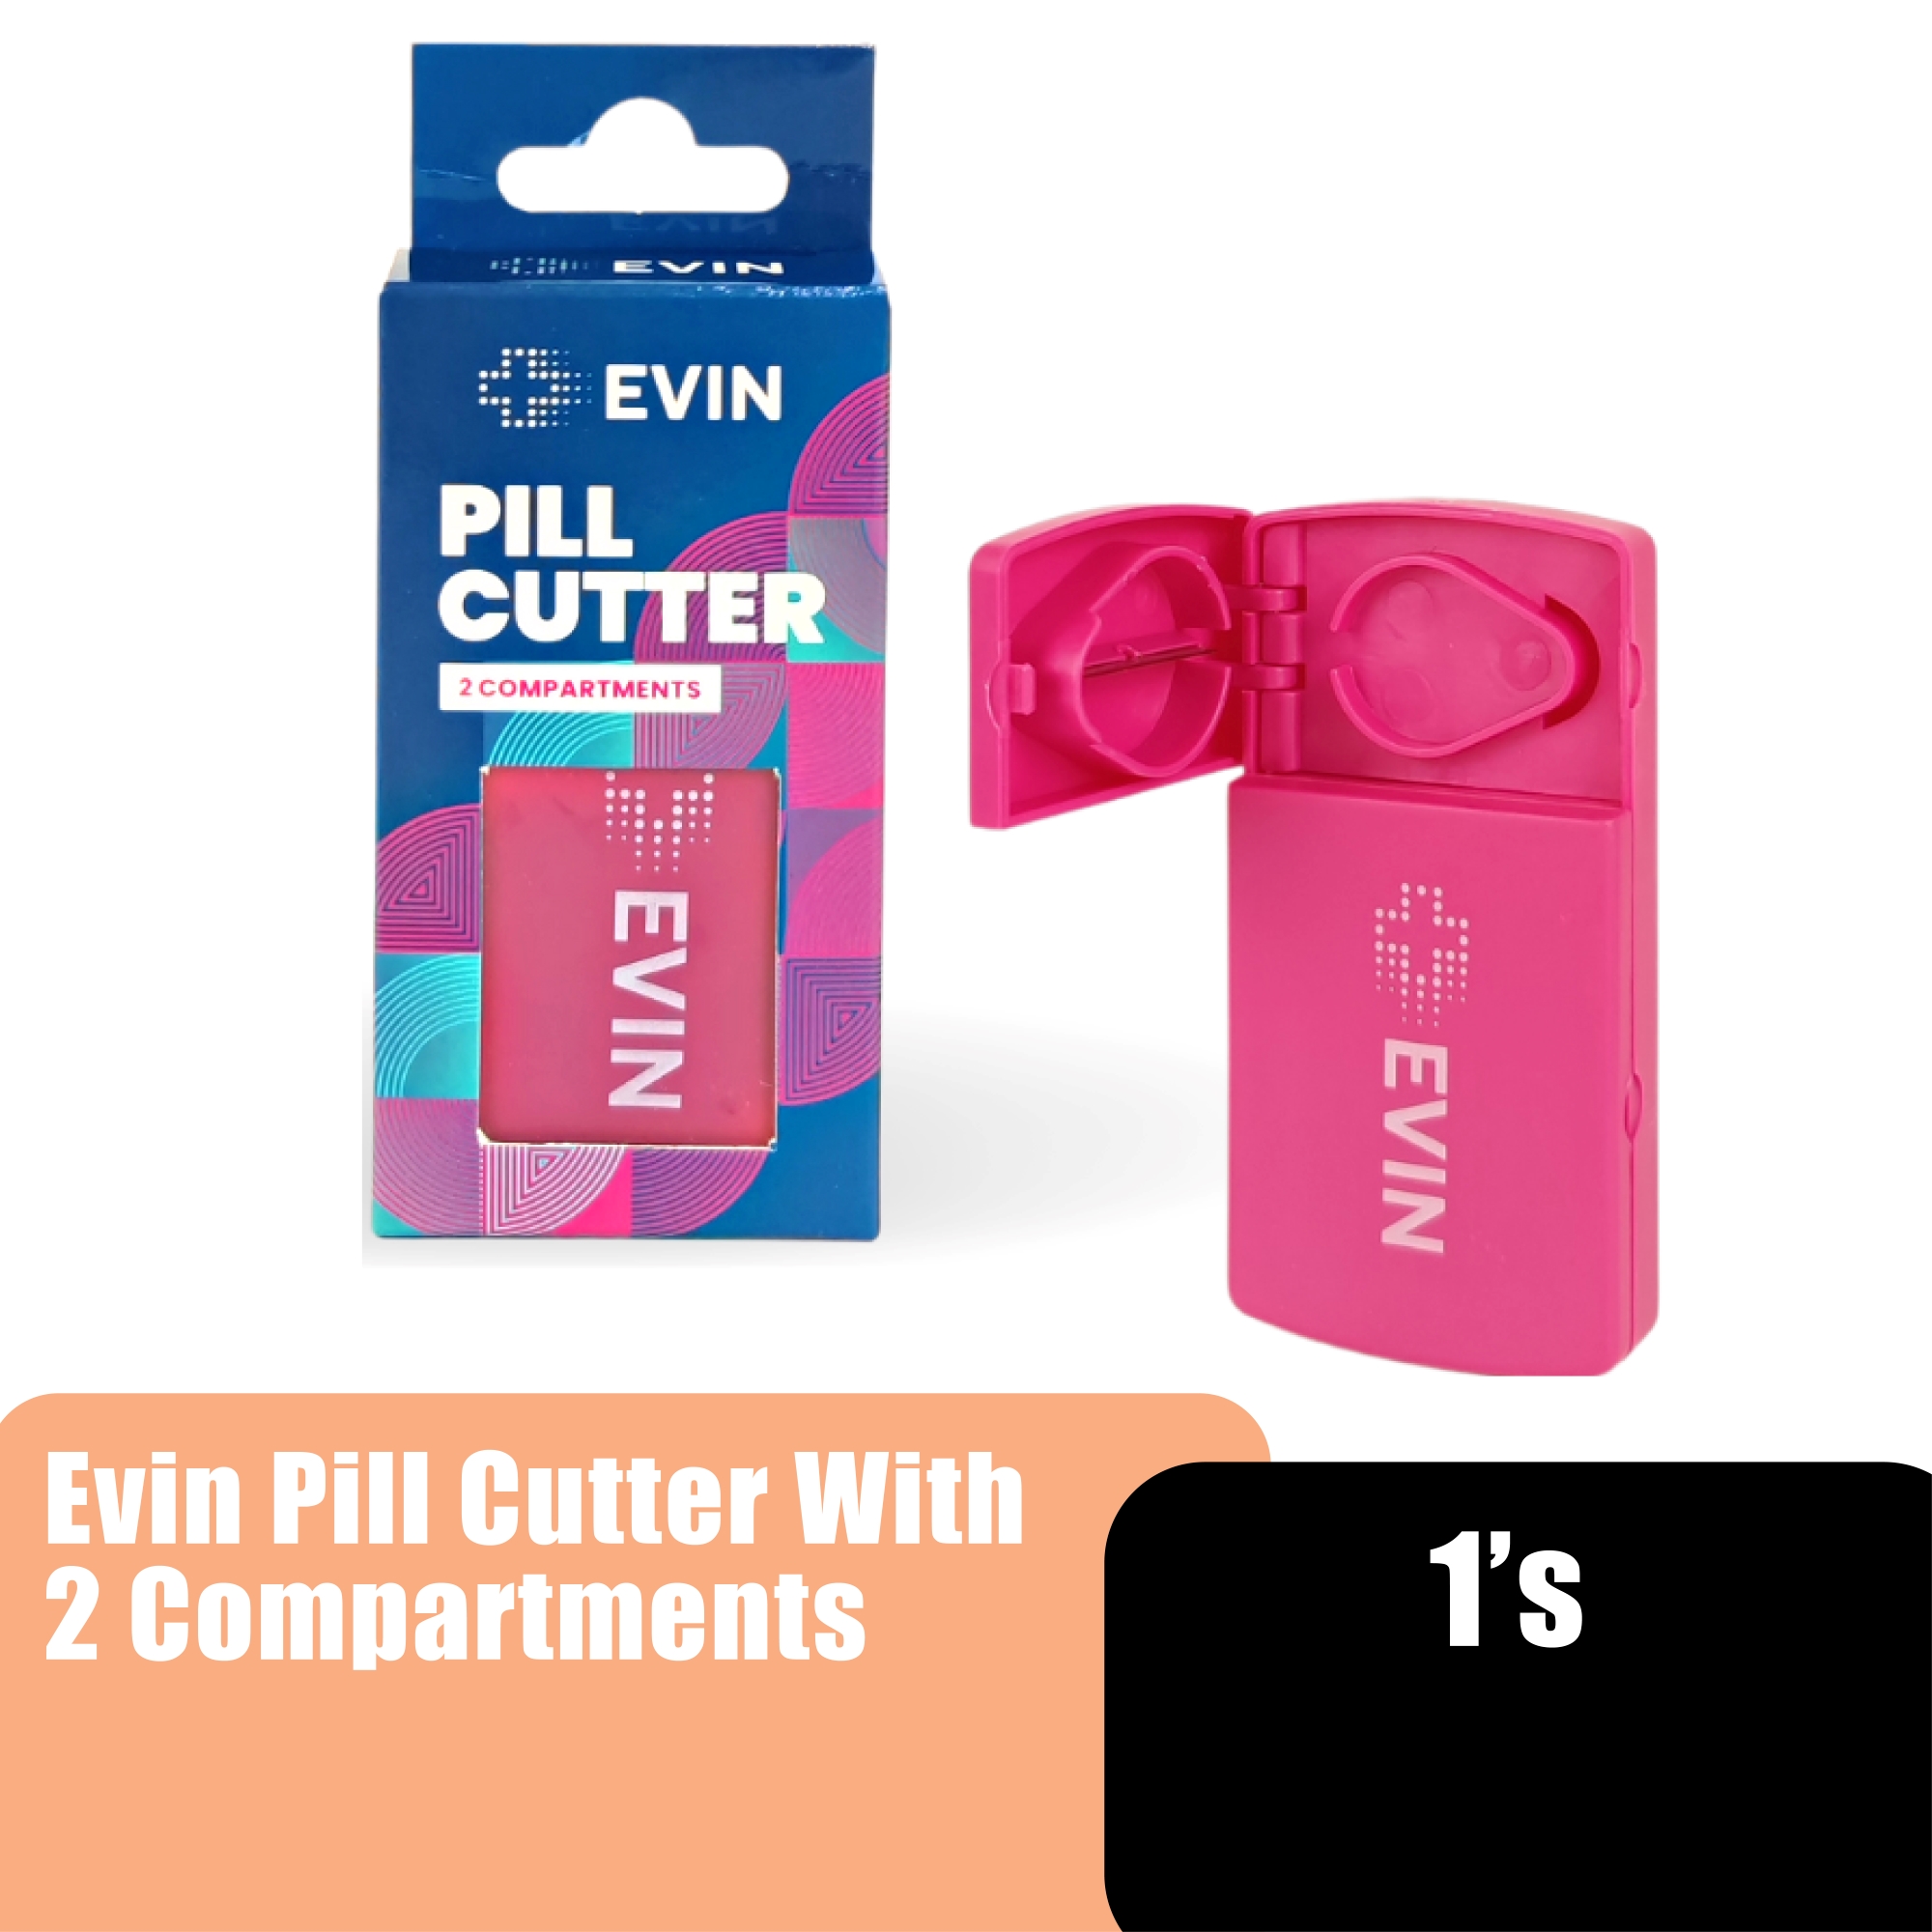 EVIN PILL CUTTER WITH 2 COMPARTMENTS